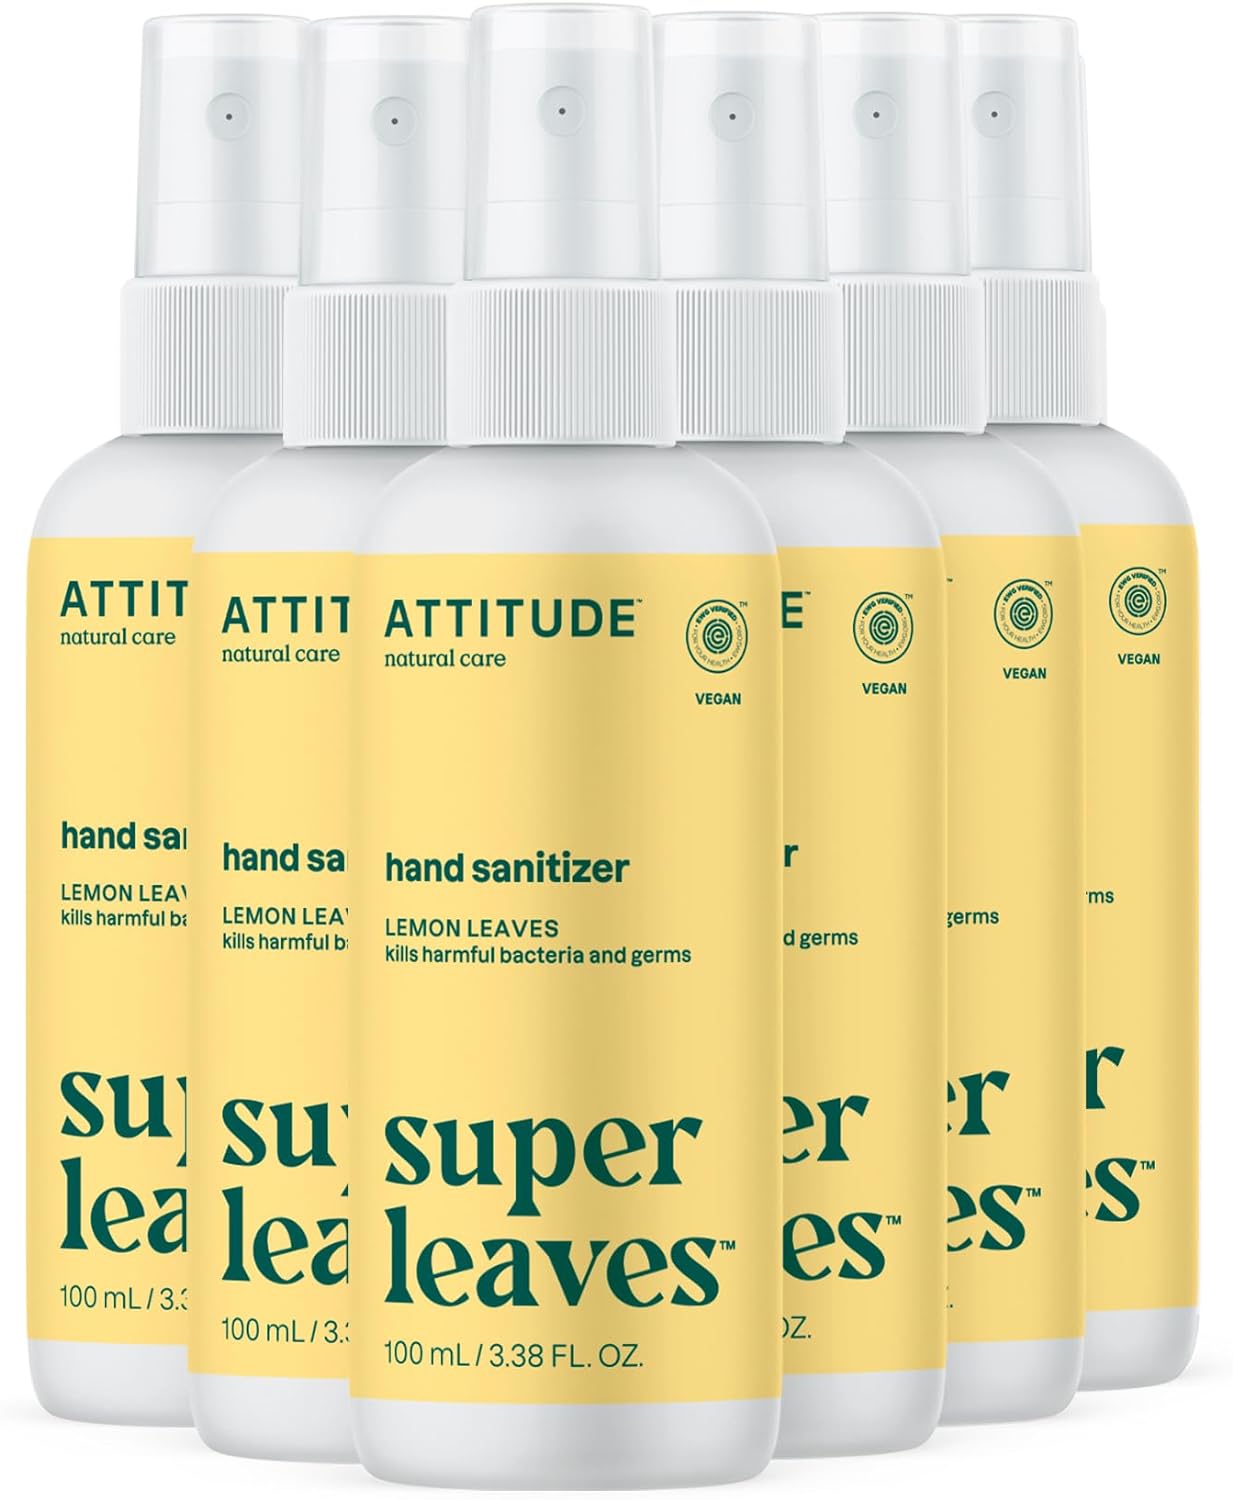 ATTITUDE Hand Sanitizer Spray for Adults and Kids, EWG Verified, Kills Bacteria and Germs, Vegan, Lemon Leaves, 3.38 Fl Oz (Spray Bottle) (Pack of 6)